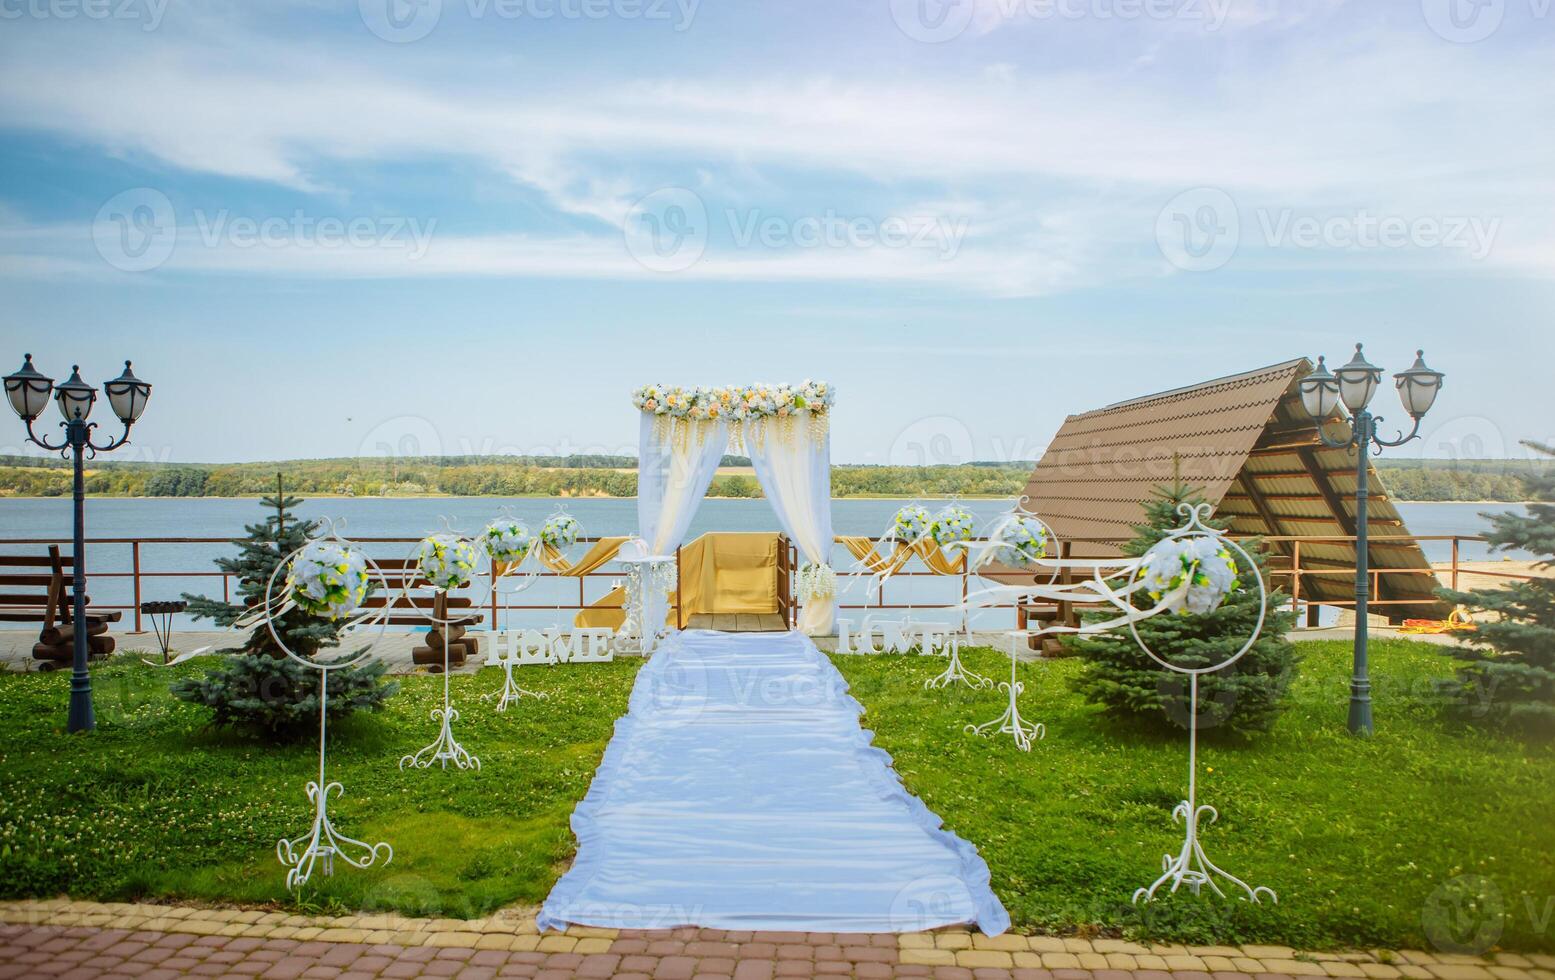 beautiful wedding arch and installed by the sea. The beginning of the wedding ceremony. Wedding day photo